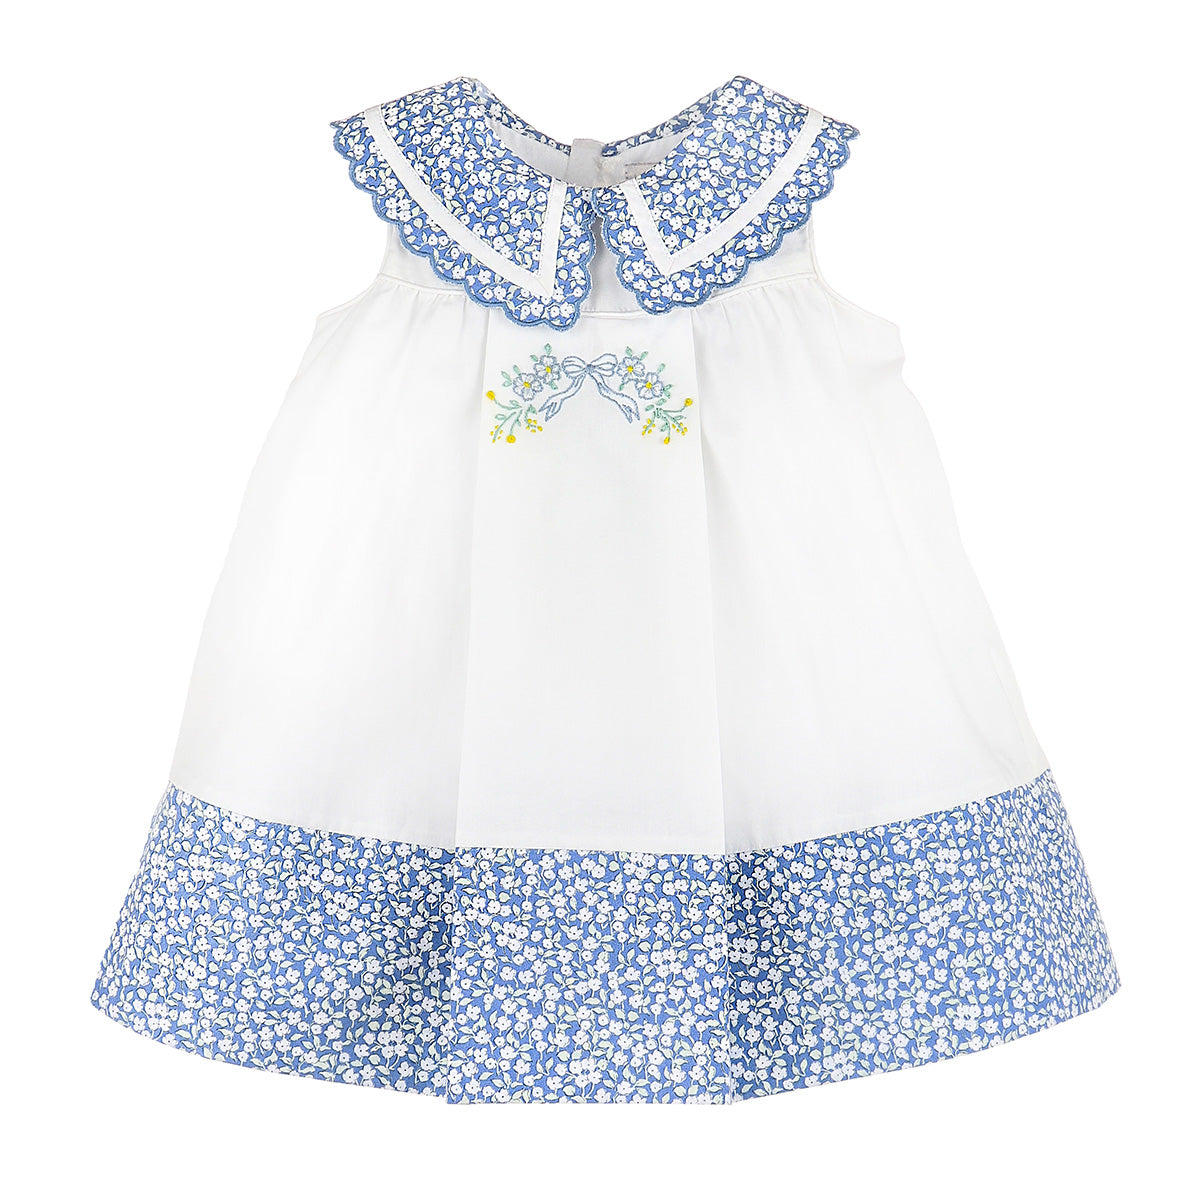 Toddler Girls Bloomy Embroidered Scalloped Collar Dress Sophie